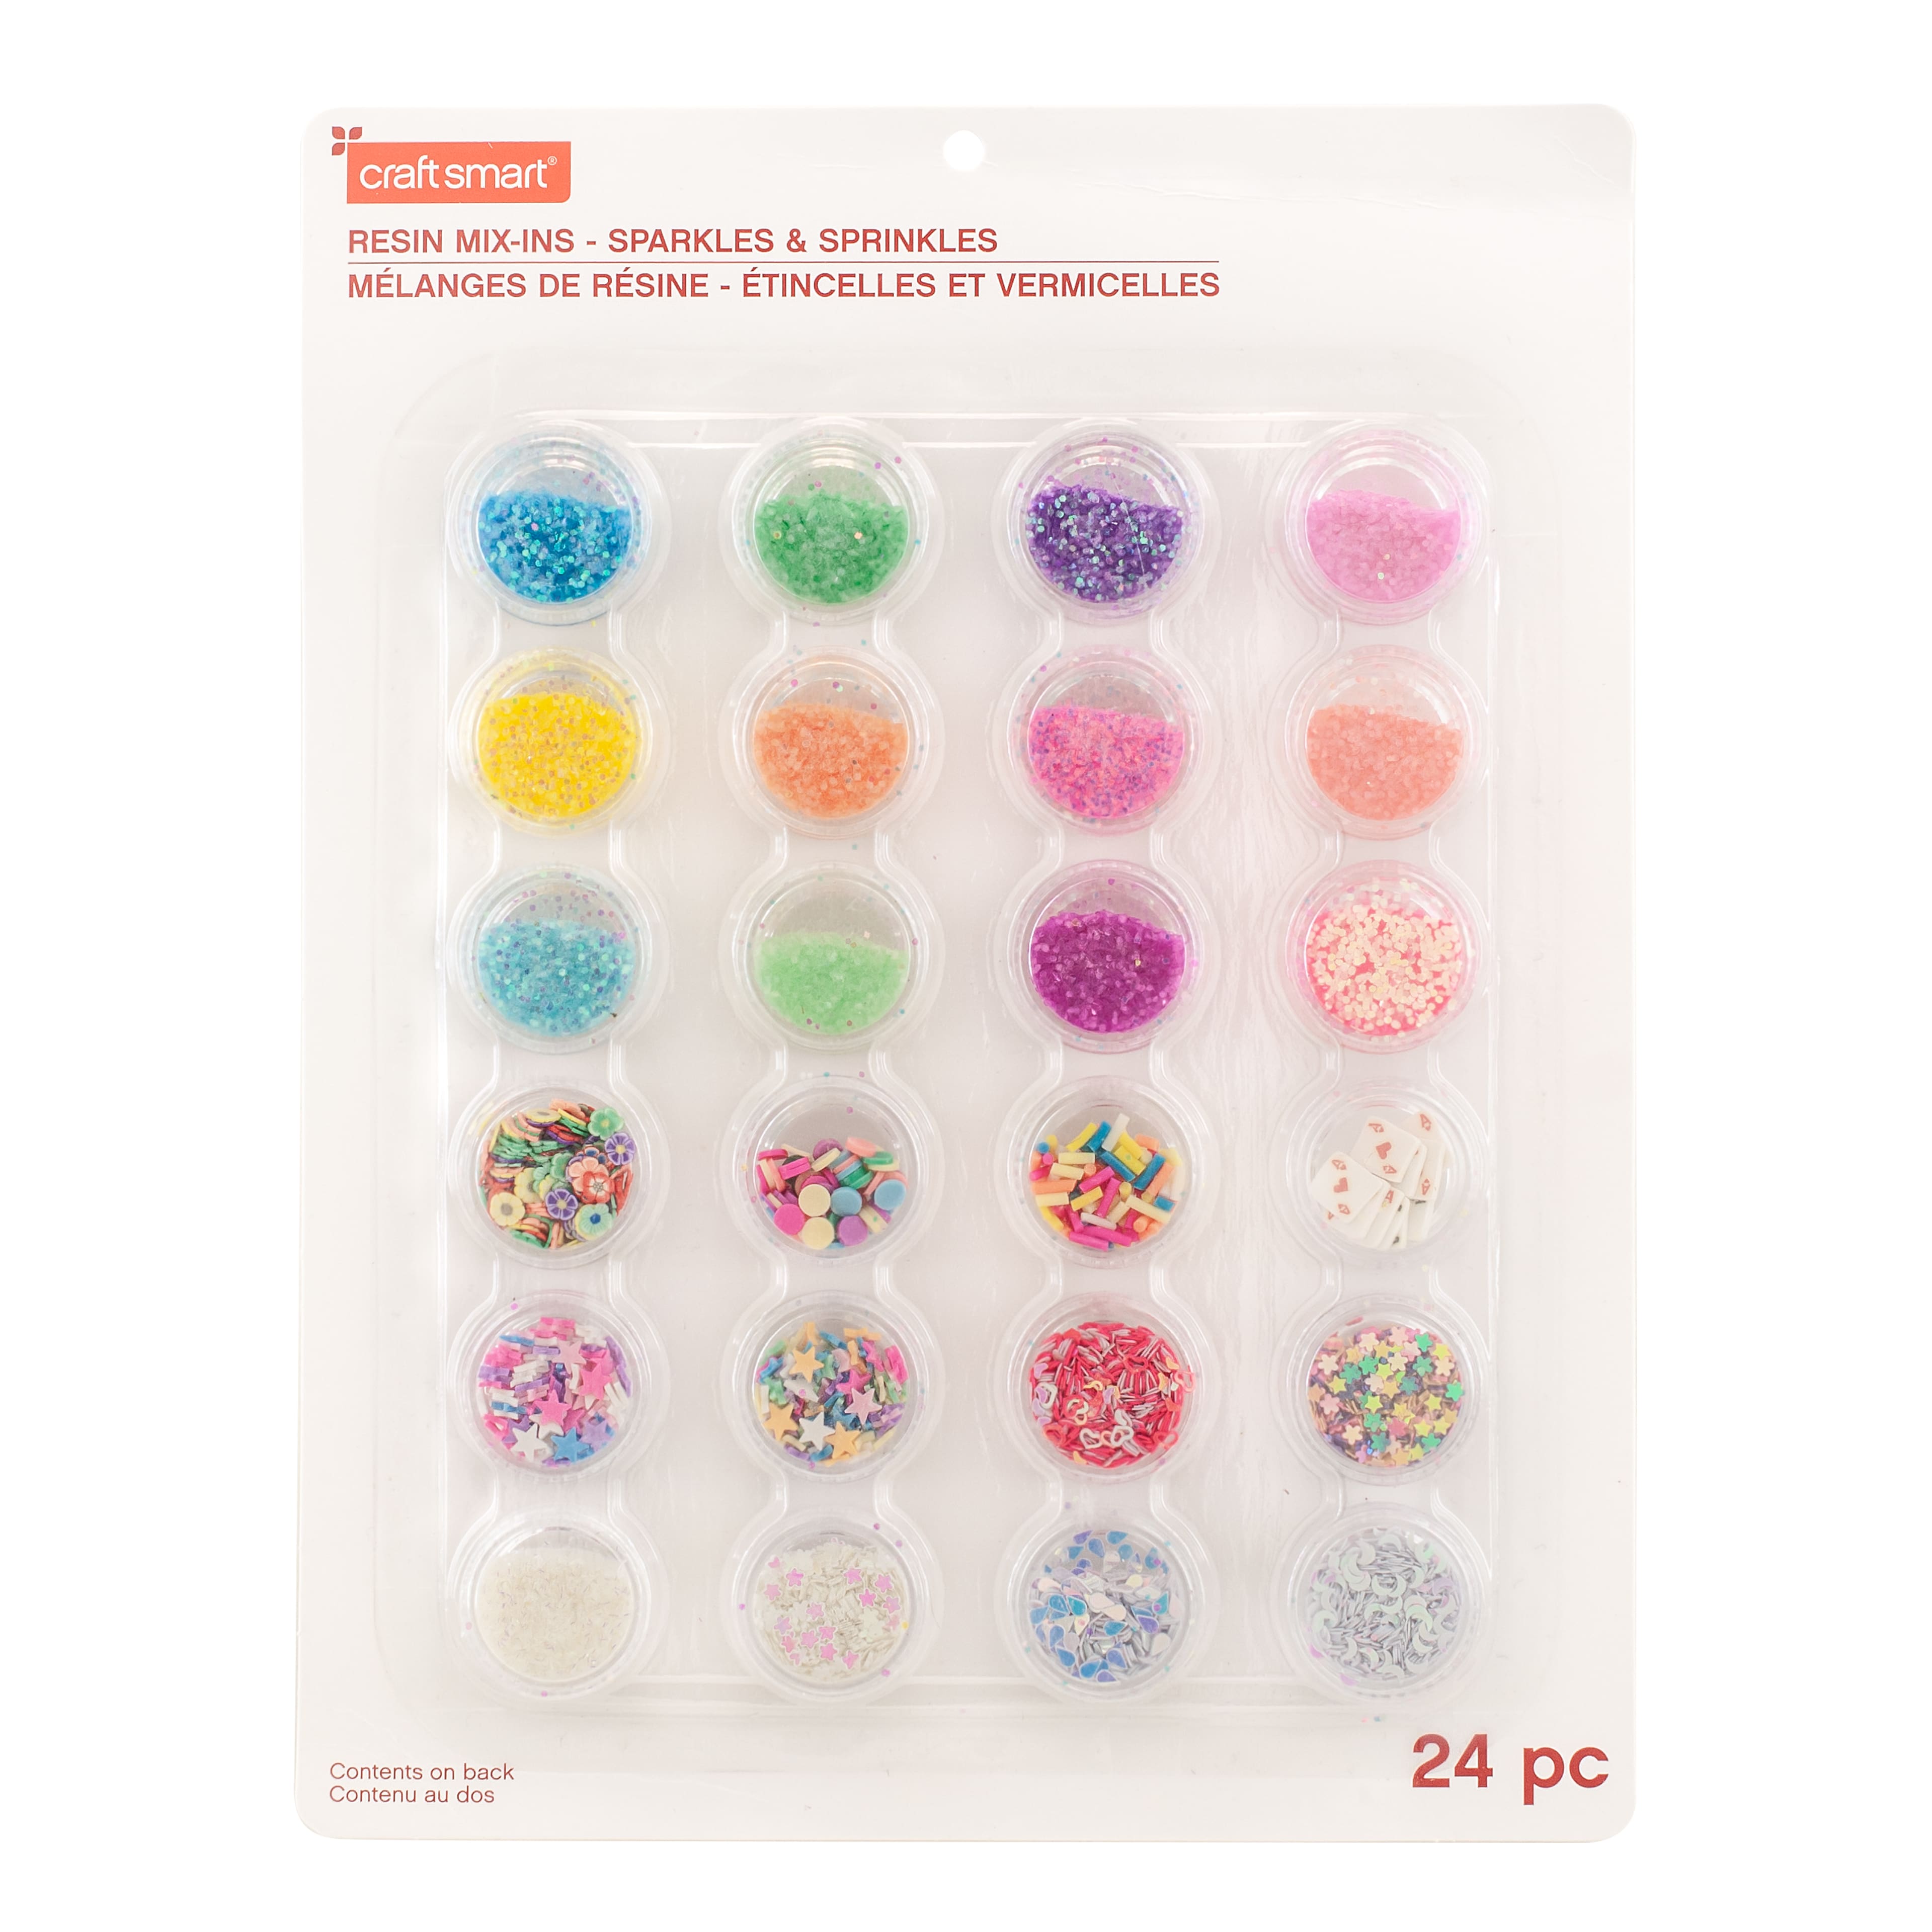 6 Packs: 24 ct. (144 total) Sparkles & Sprinkles Resin Mix-Ins by